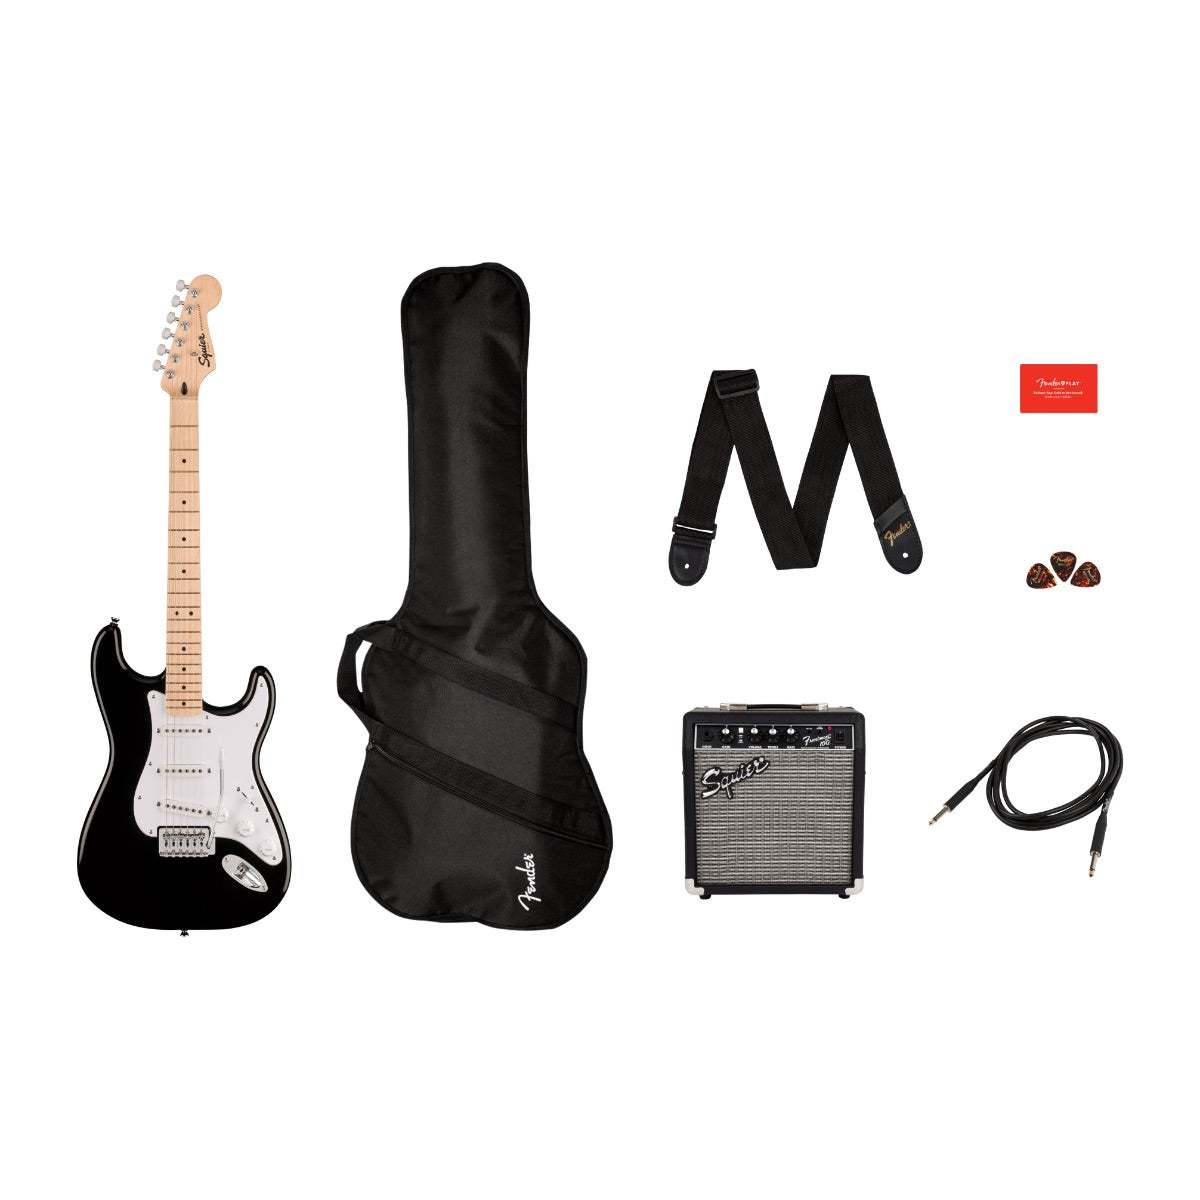 Squier Stratocaster Electric Guitar Pack